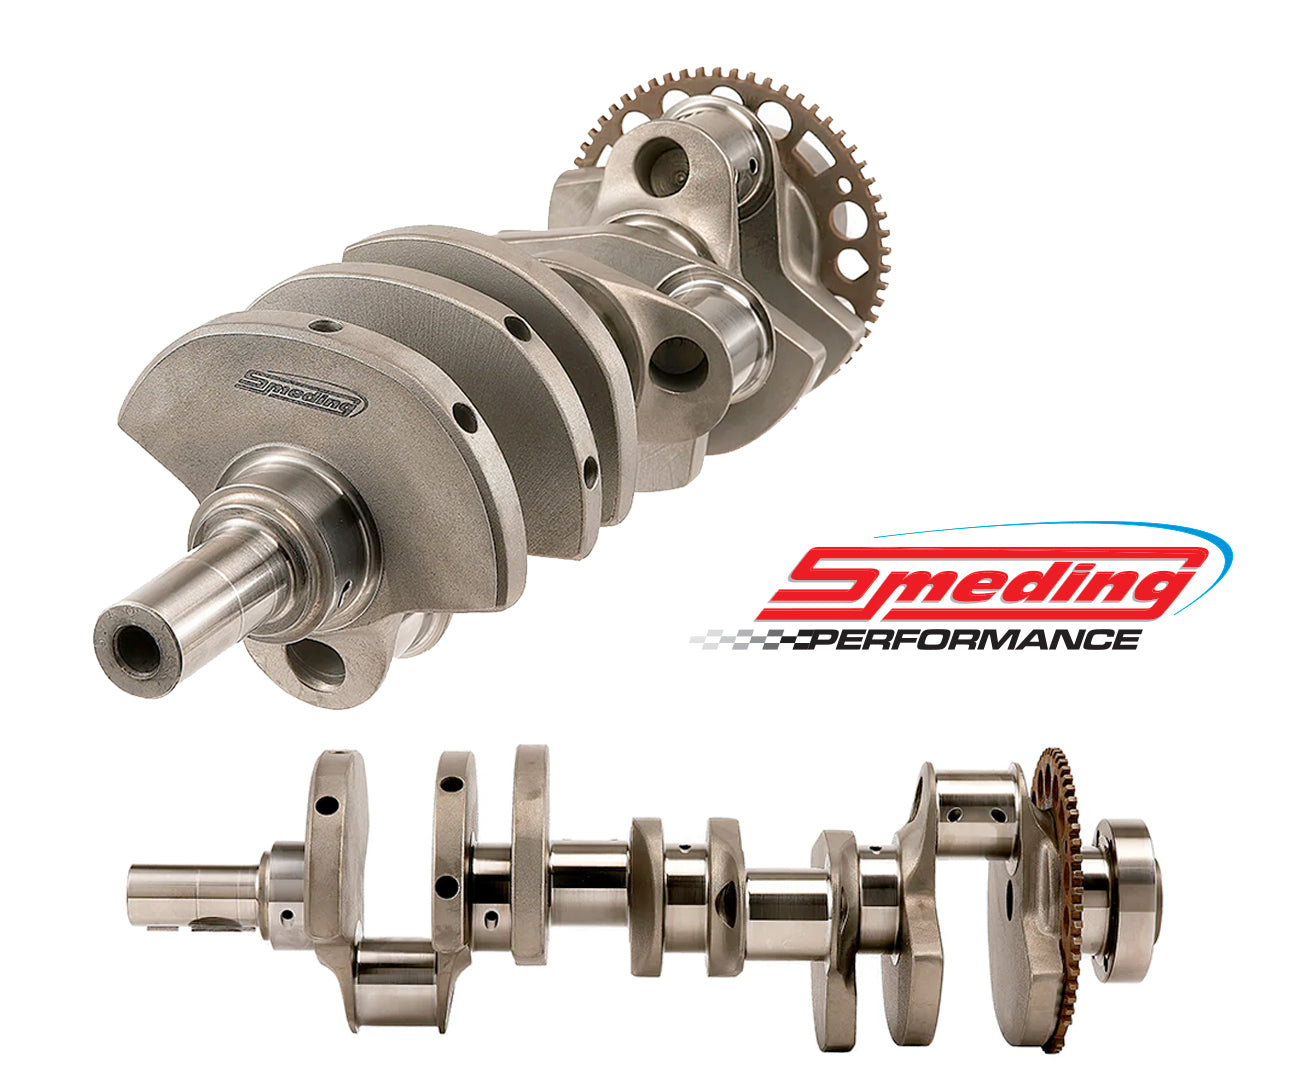 Easily Add Additional Horsepower with the LS 4.000” Crankshaft from Smeding Performance